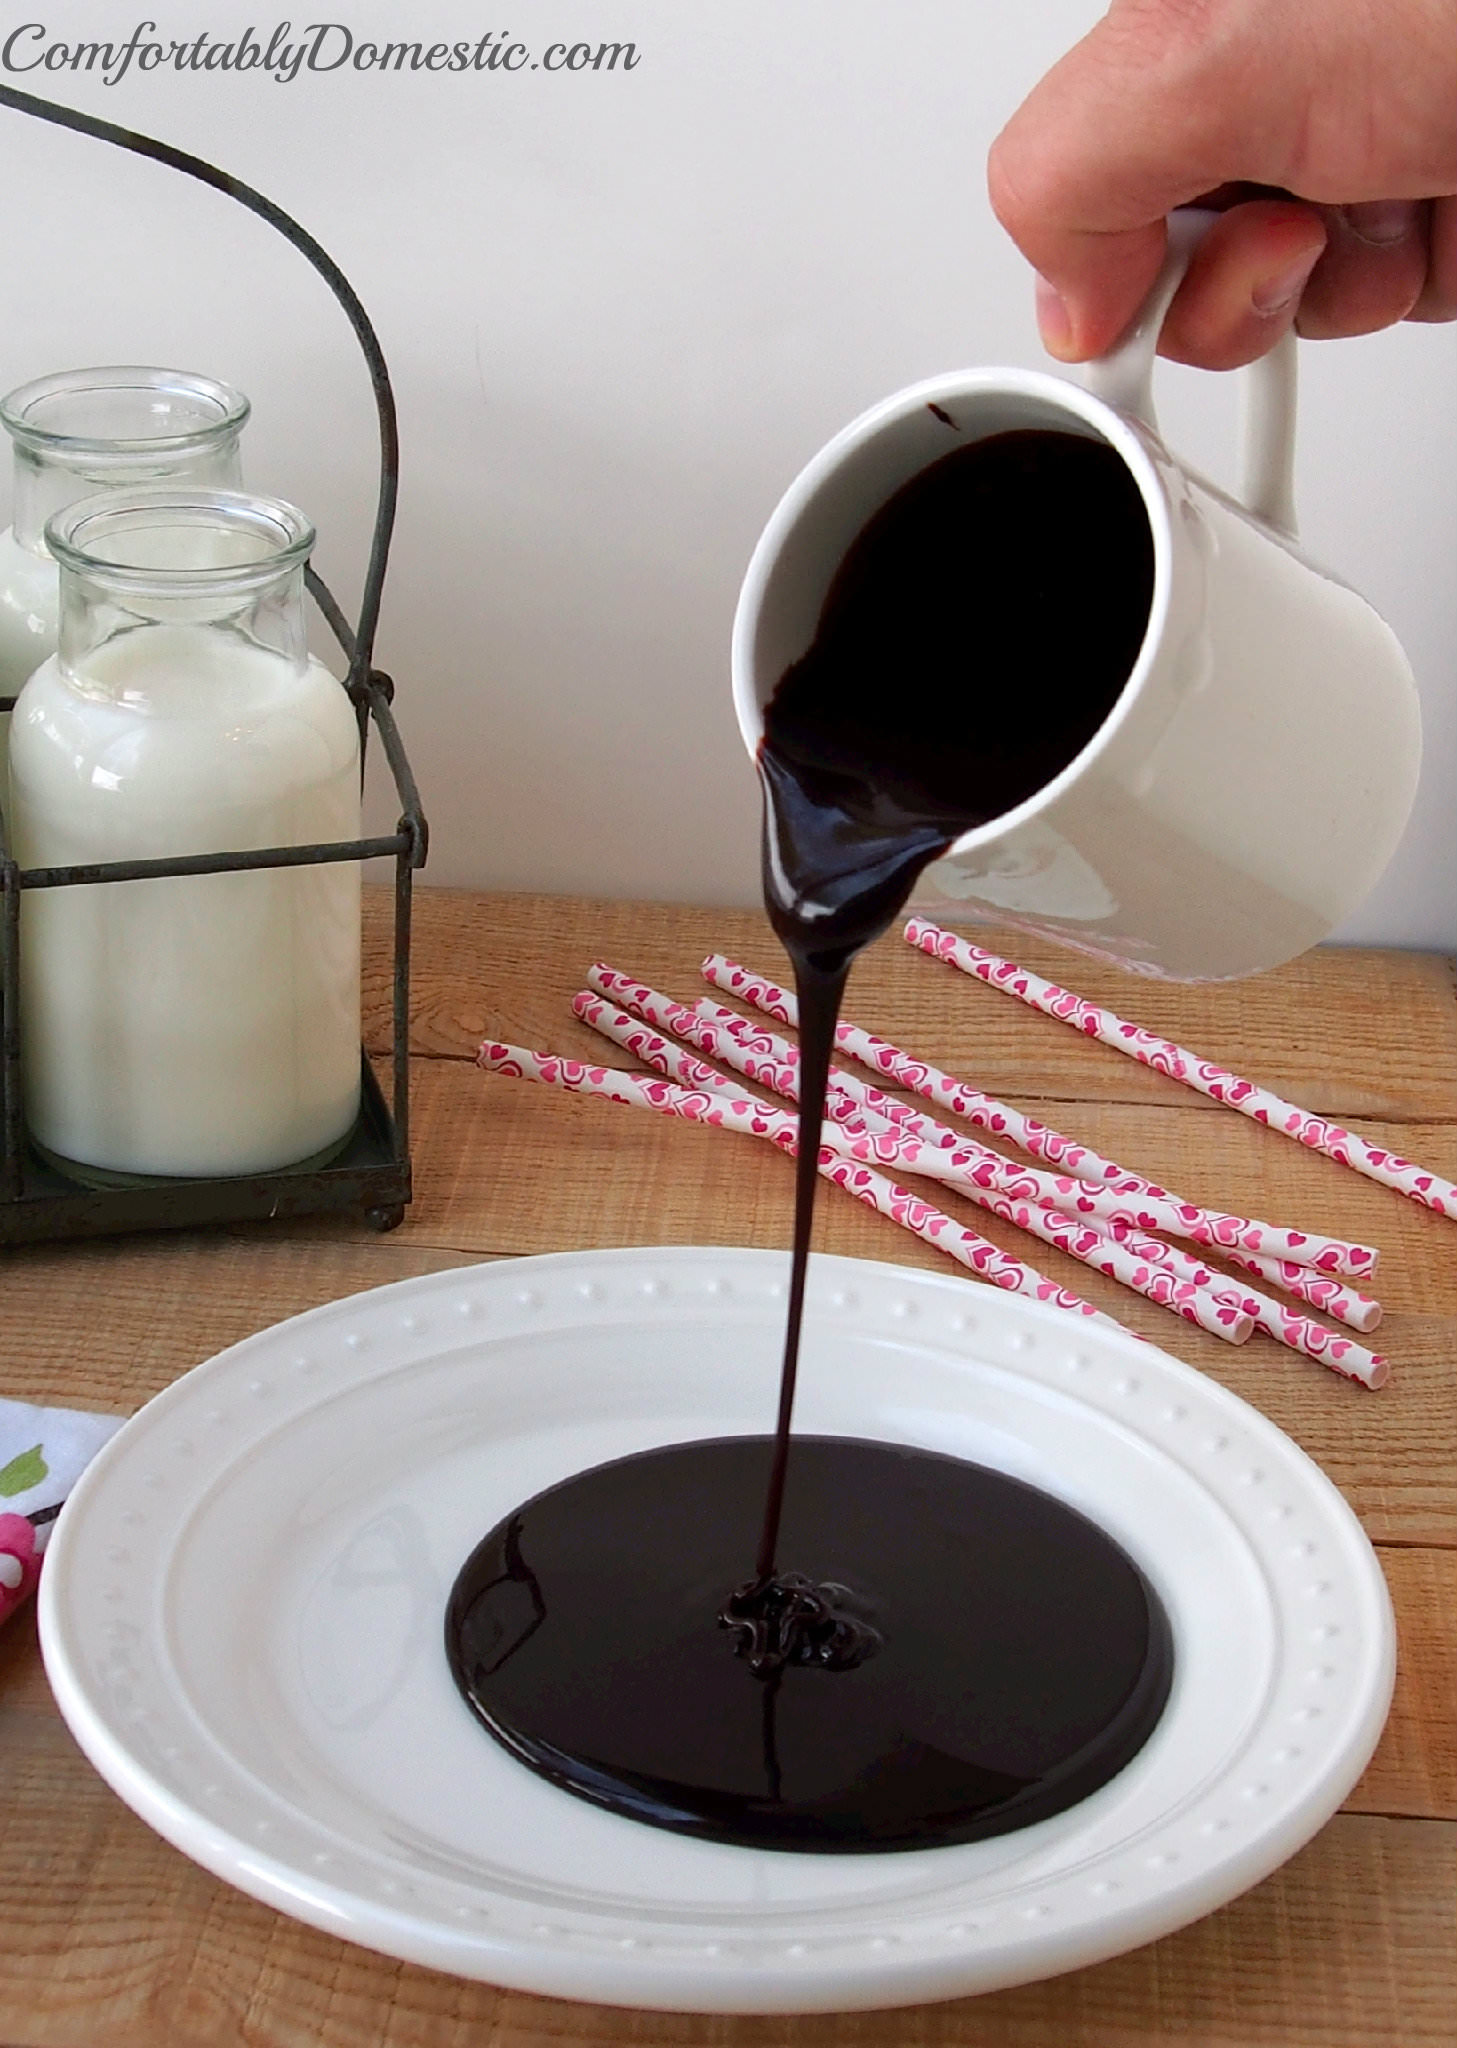 Copy Cat Hershey's homemade chocolate syrup is a thick, glossy, opulent but affordable luxury that's easily made with a just few pantry items. | ComfortablyDomestic.com